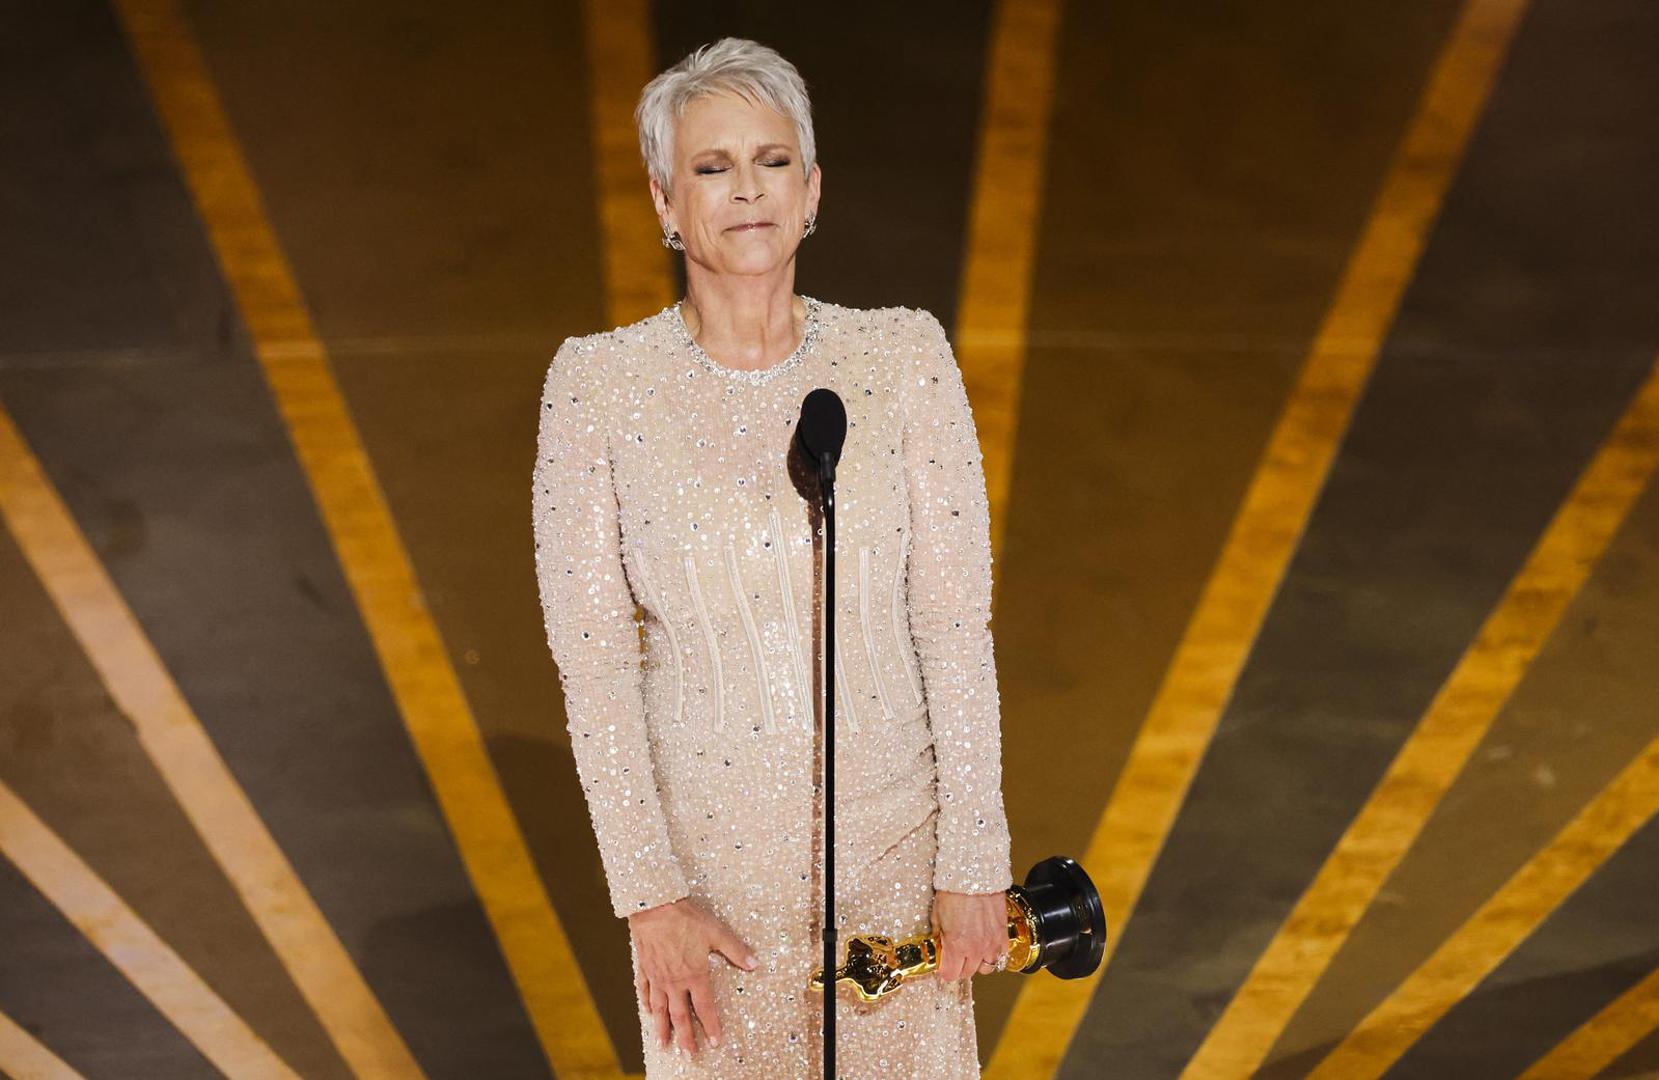 Jamie Lee Curtis wins the Oscar for Best Supporting Actress for "Everything Everywhere All at Once" during the Oscars show at the 95th Academy Awards in Hollywood, Los Angeles, California, U.S., March 12, 2023. REUTERS/Carlos Barria Photo: CARLOS BARRIA/REUTERS